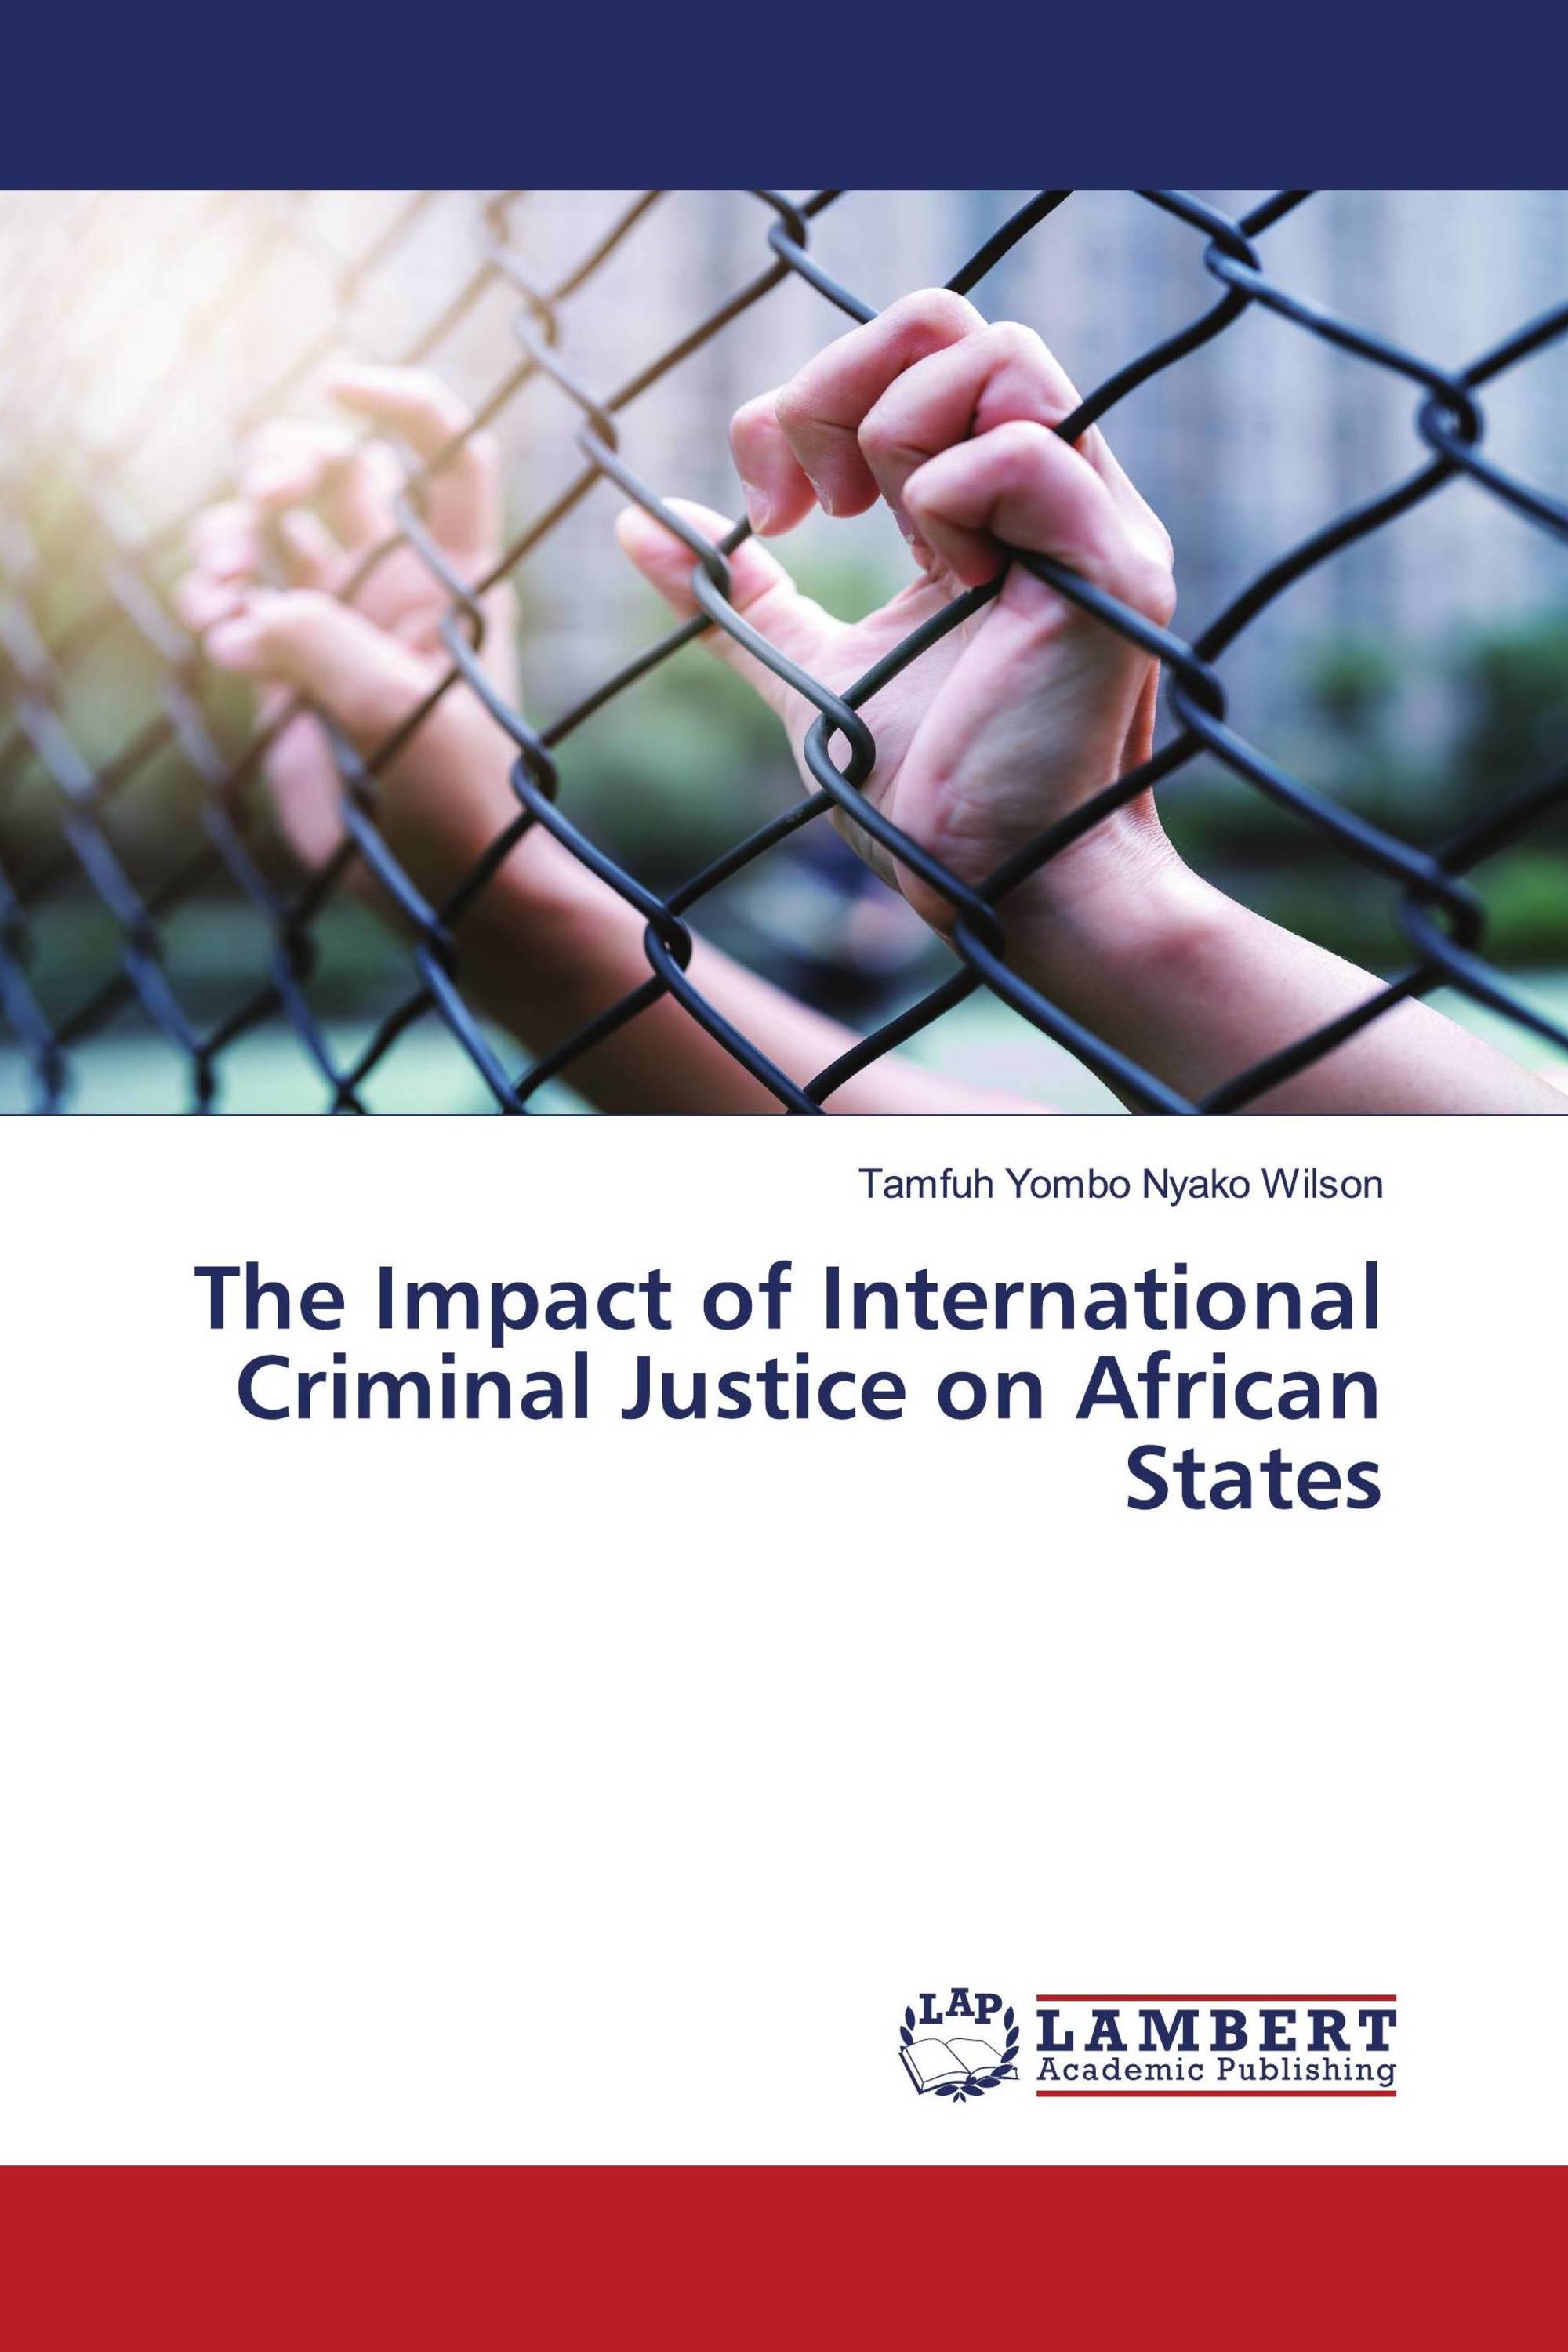 The Impact of International Criminal Justice on African States